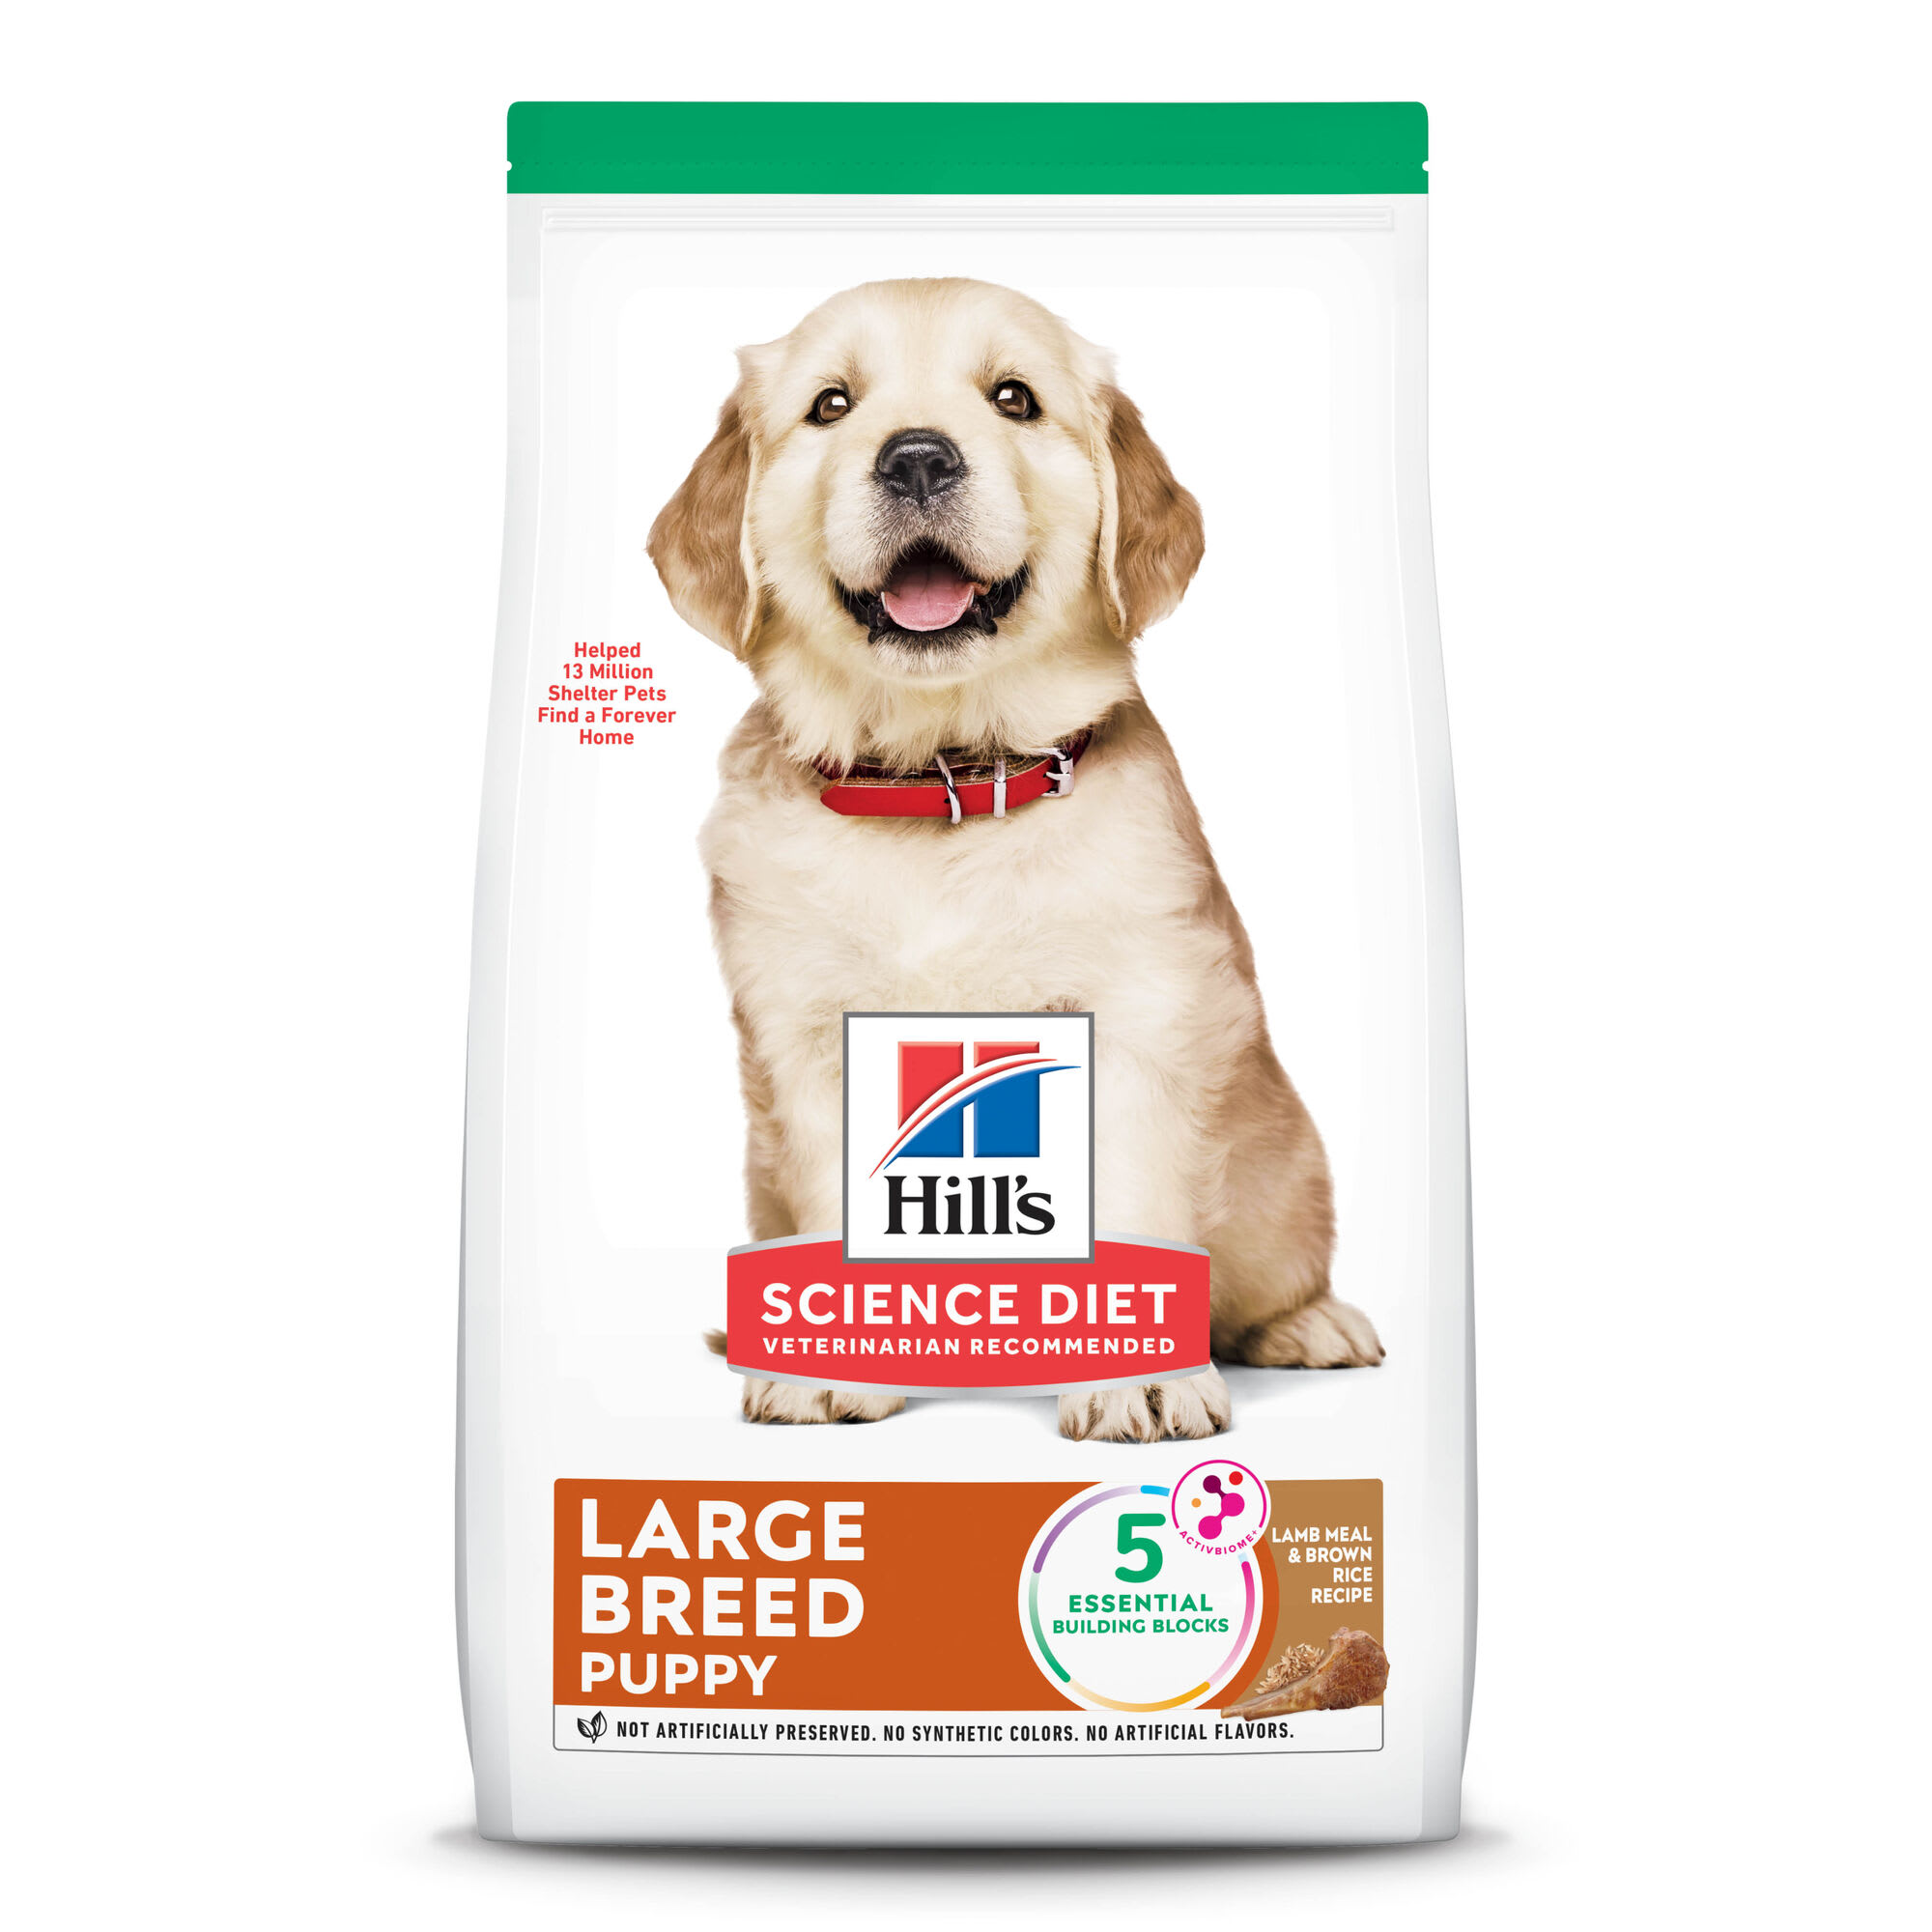 Photos - Dog Food Hills Hill's Hill's Science Diet Lamb Meal & Brown Rice Recipe Large Breed Dry P 